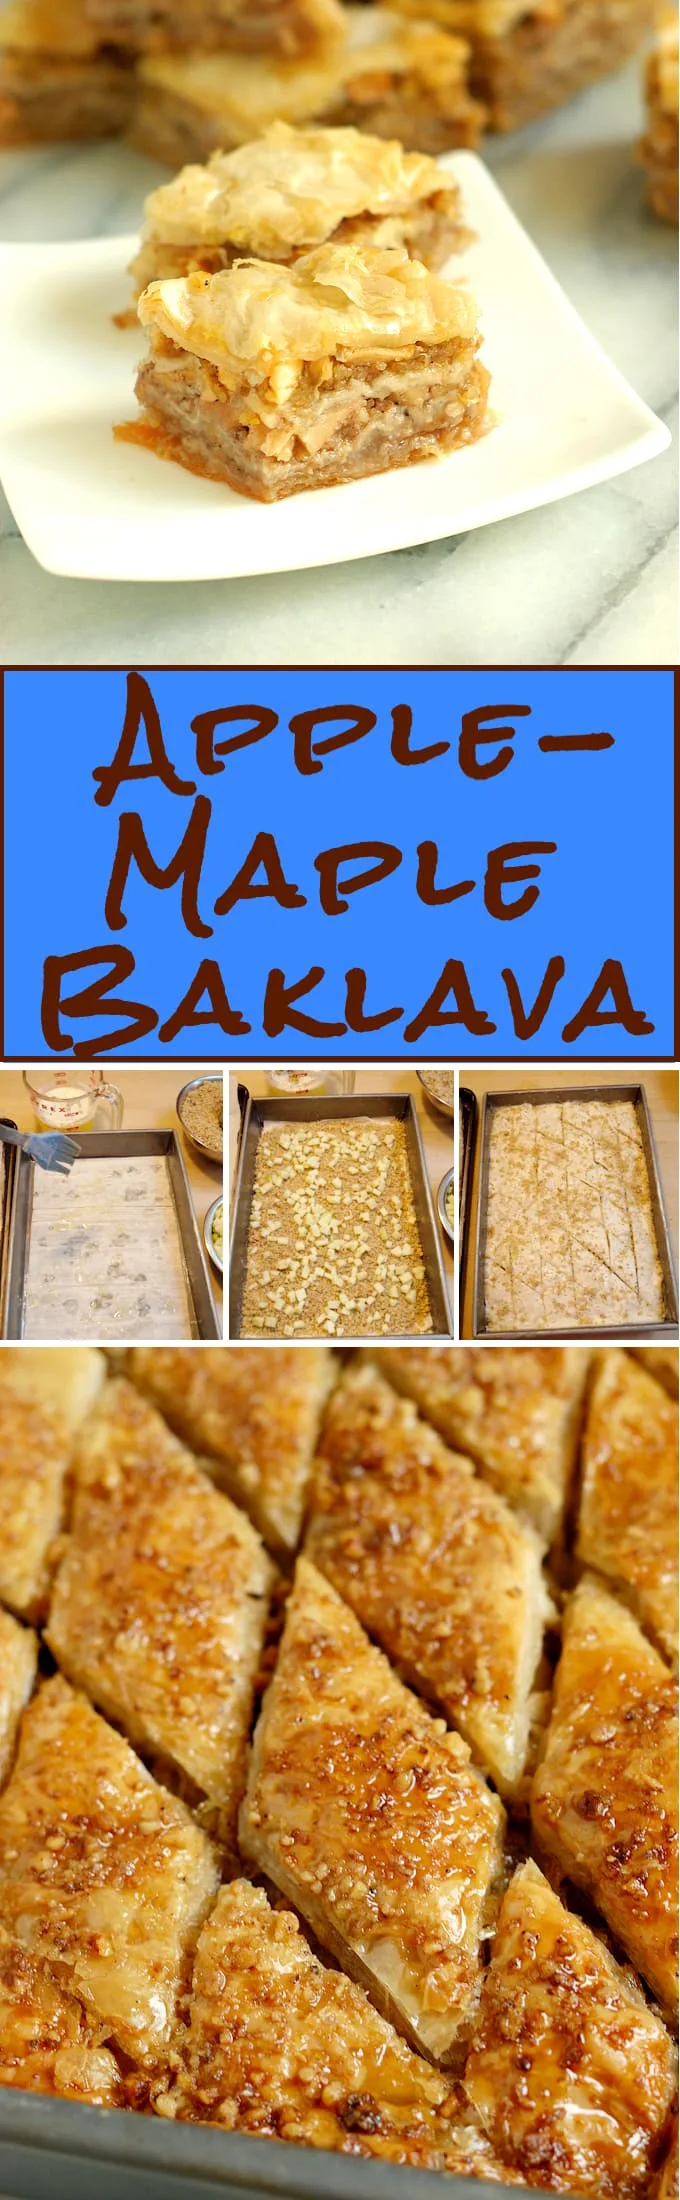 If traditional Baklava and all-American Apple Pie had a baby, it would be Apple Maple Baklava.